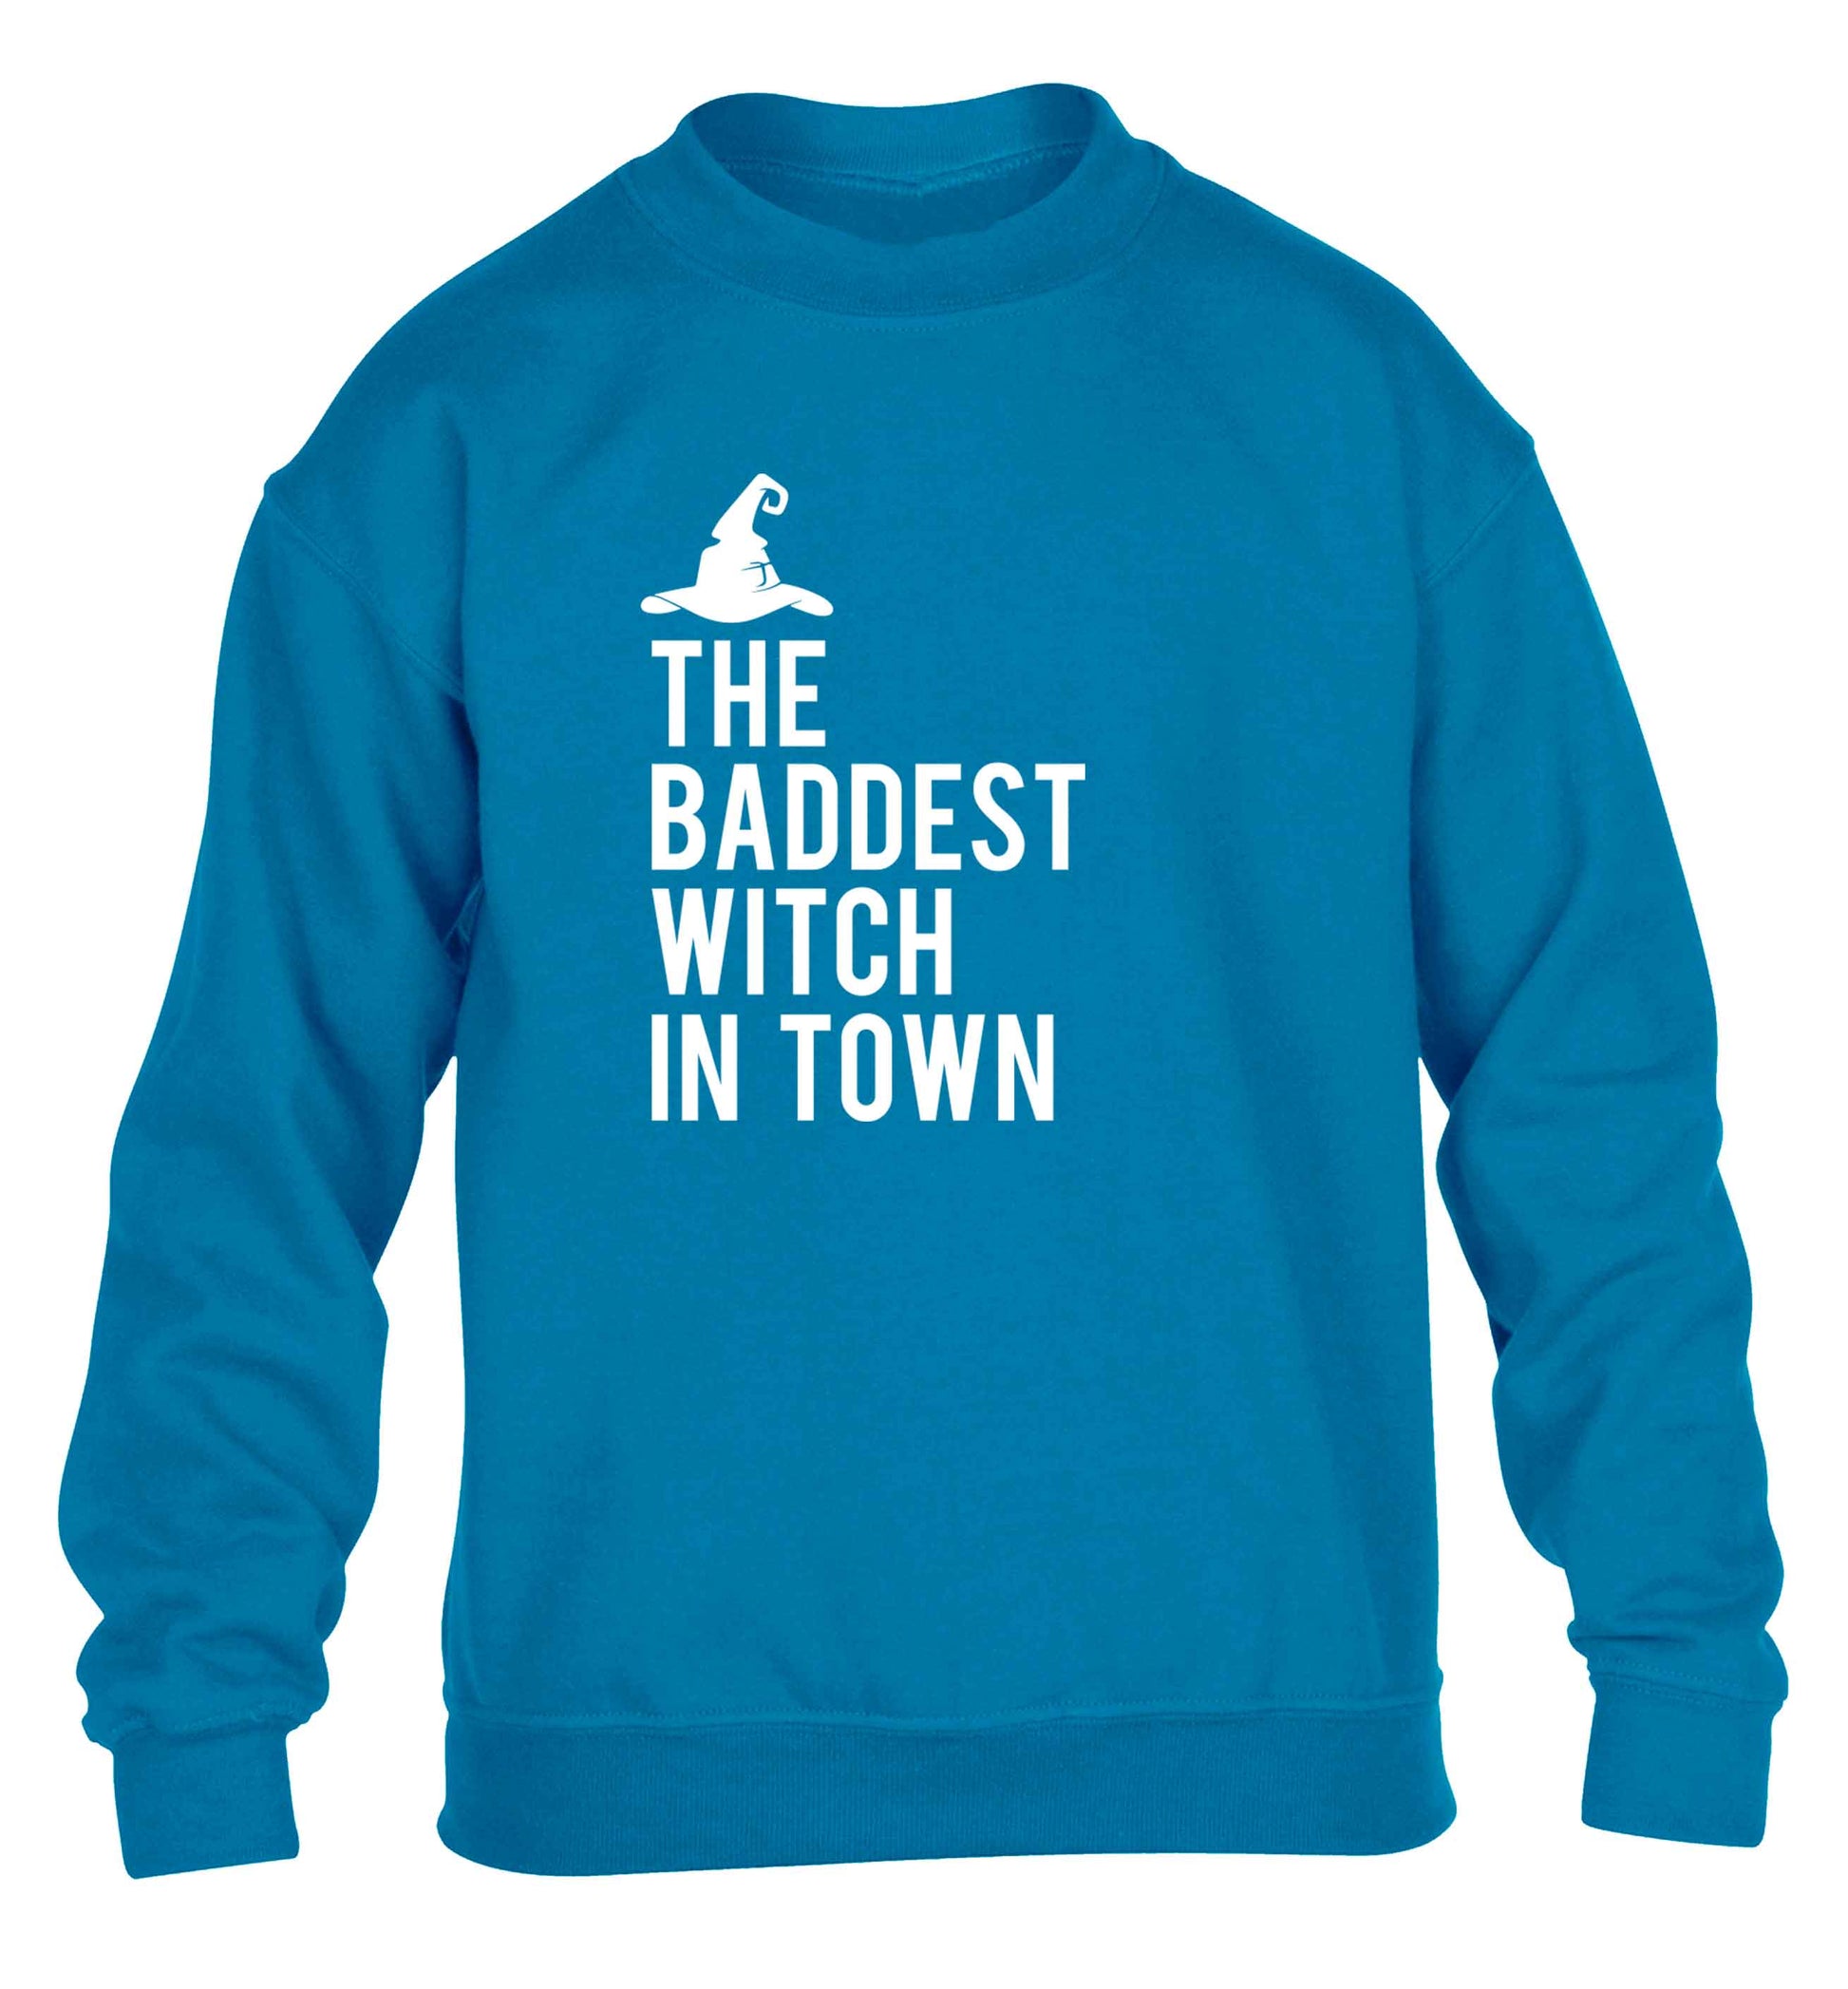 Badest witch in town children's blue sweater 12-13 Years